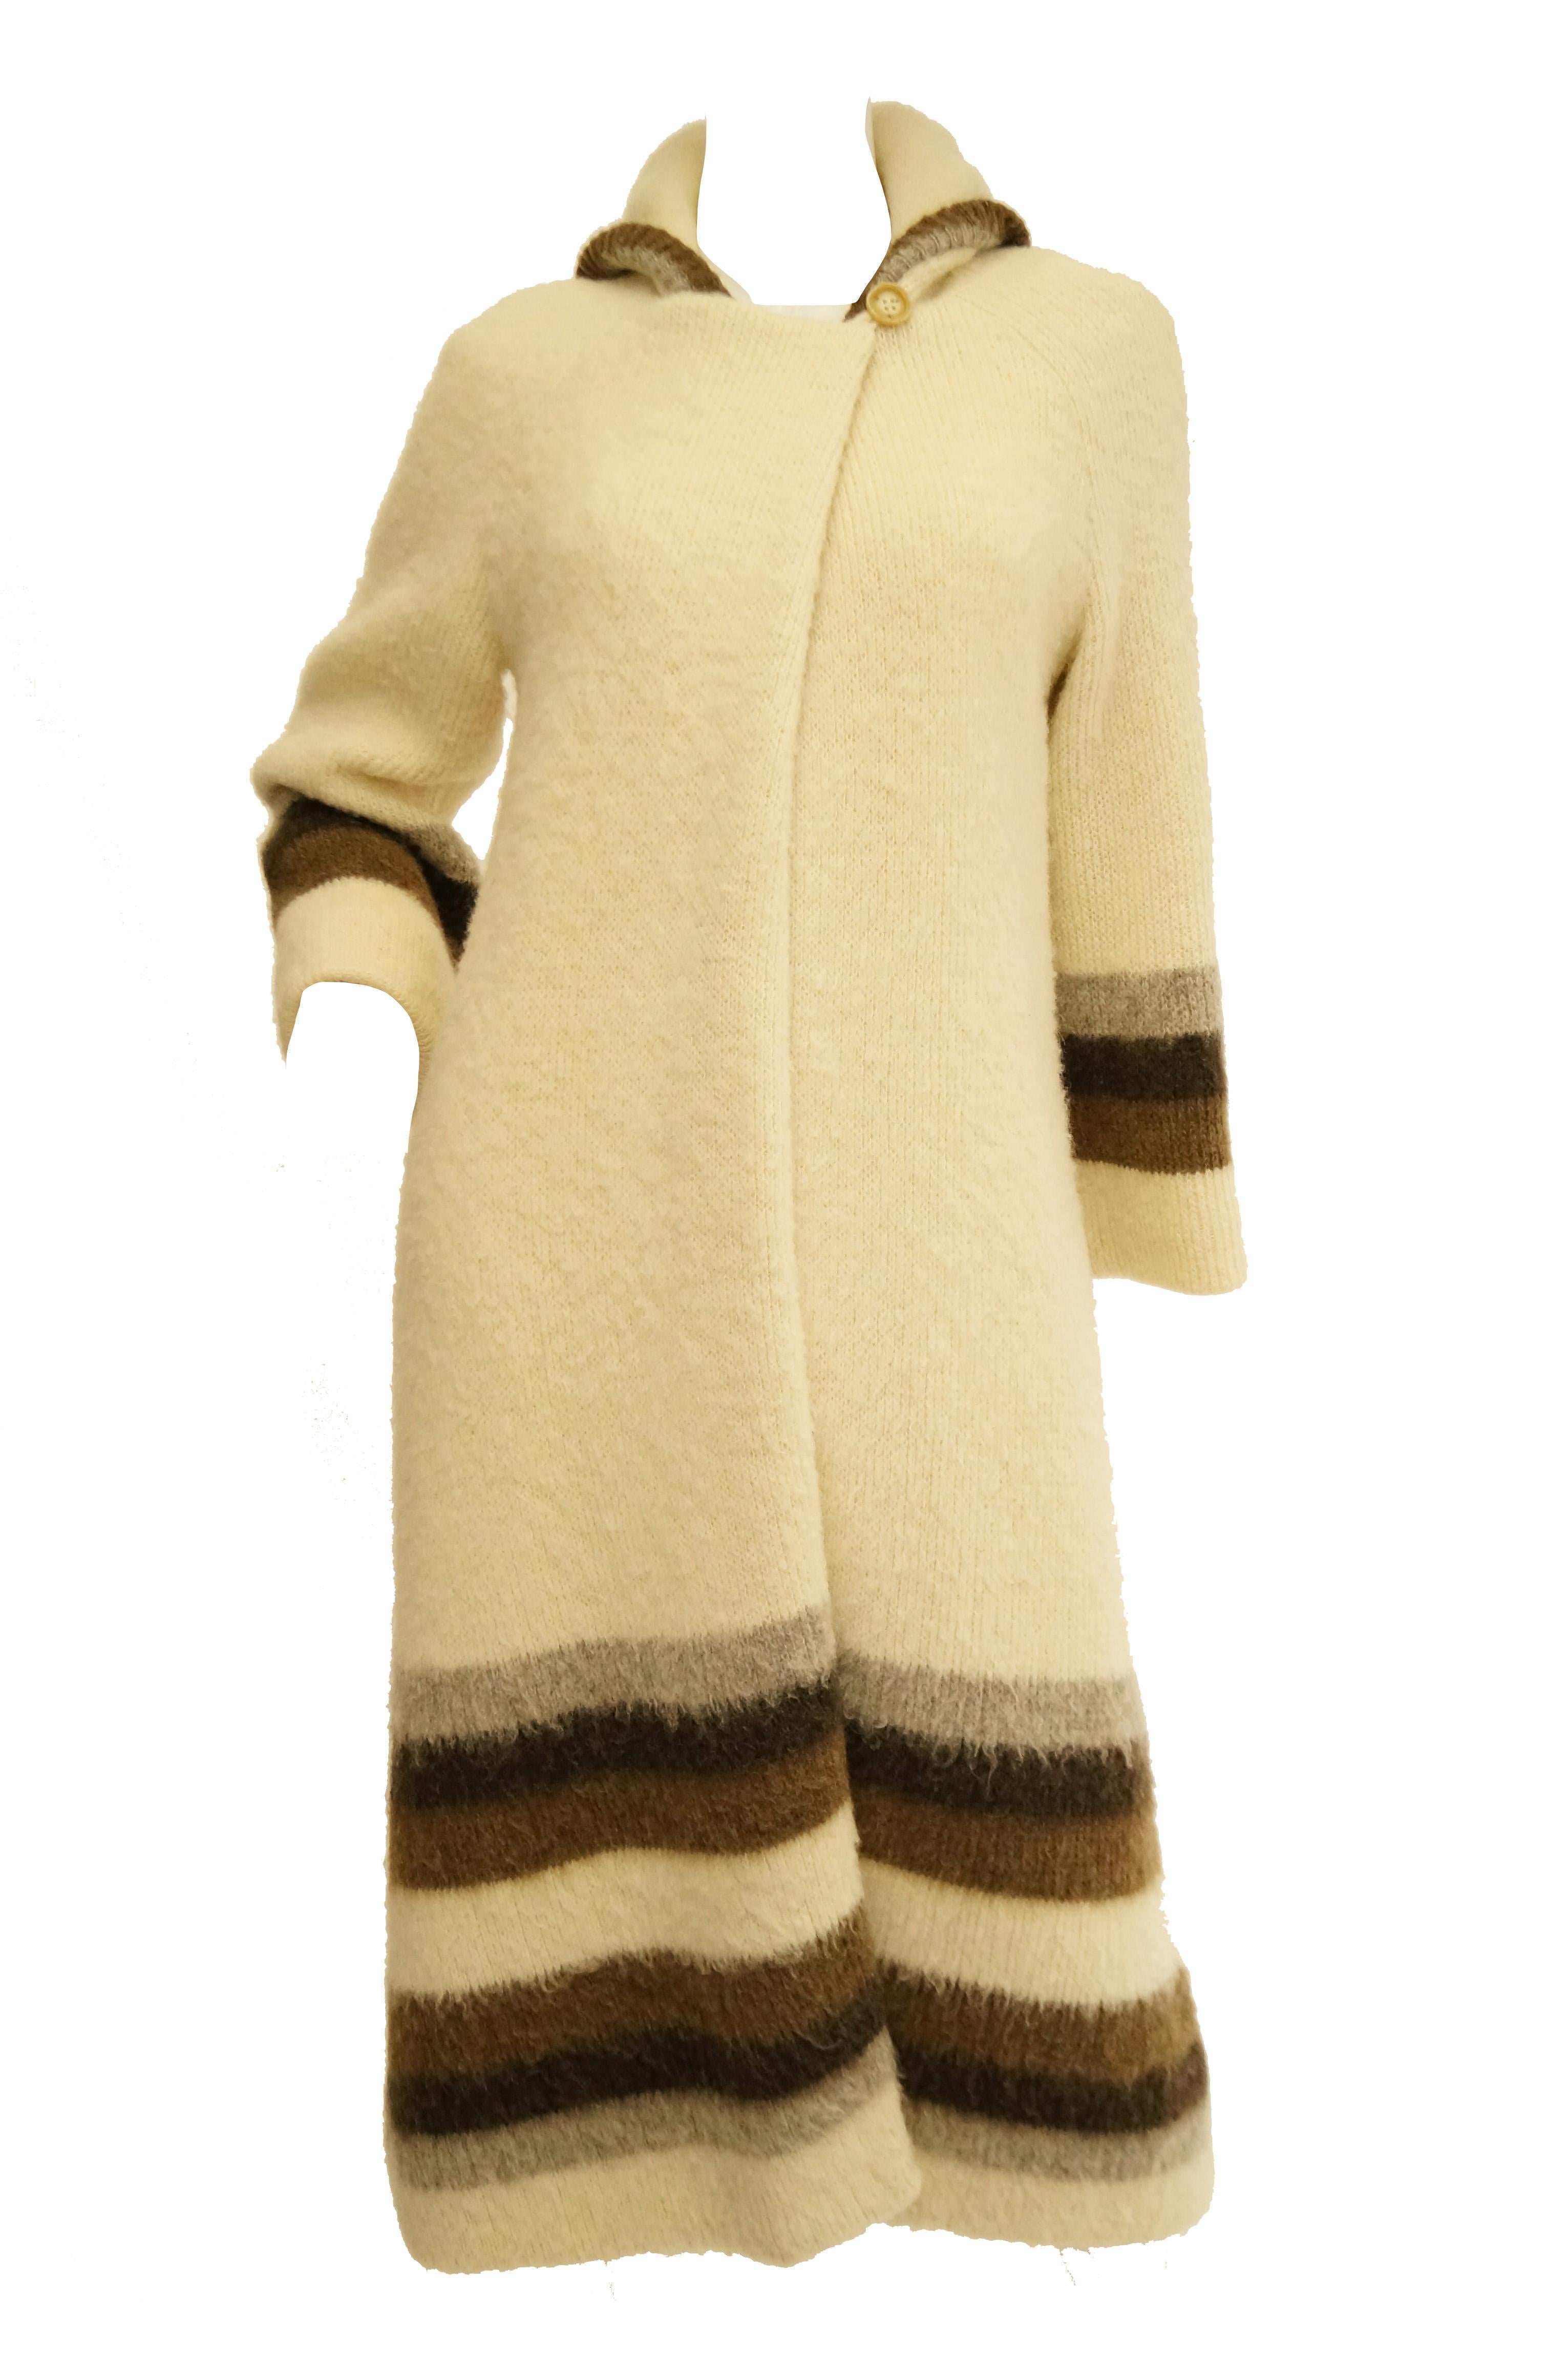 Beautiful and warm cream wool coat by Hilda of Iceland! This cozy coat is halfway to cardigan, falls at around knee length, has long sleeves, and a hood. The coat has a right - over - left Horn button closure at the neck with a free falling front.